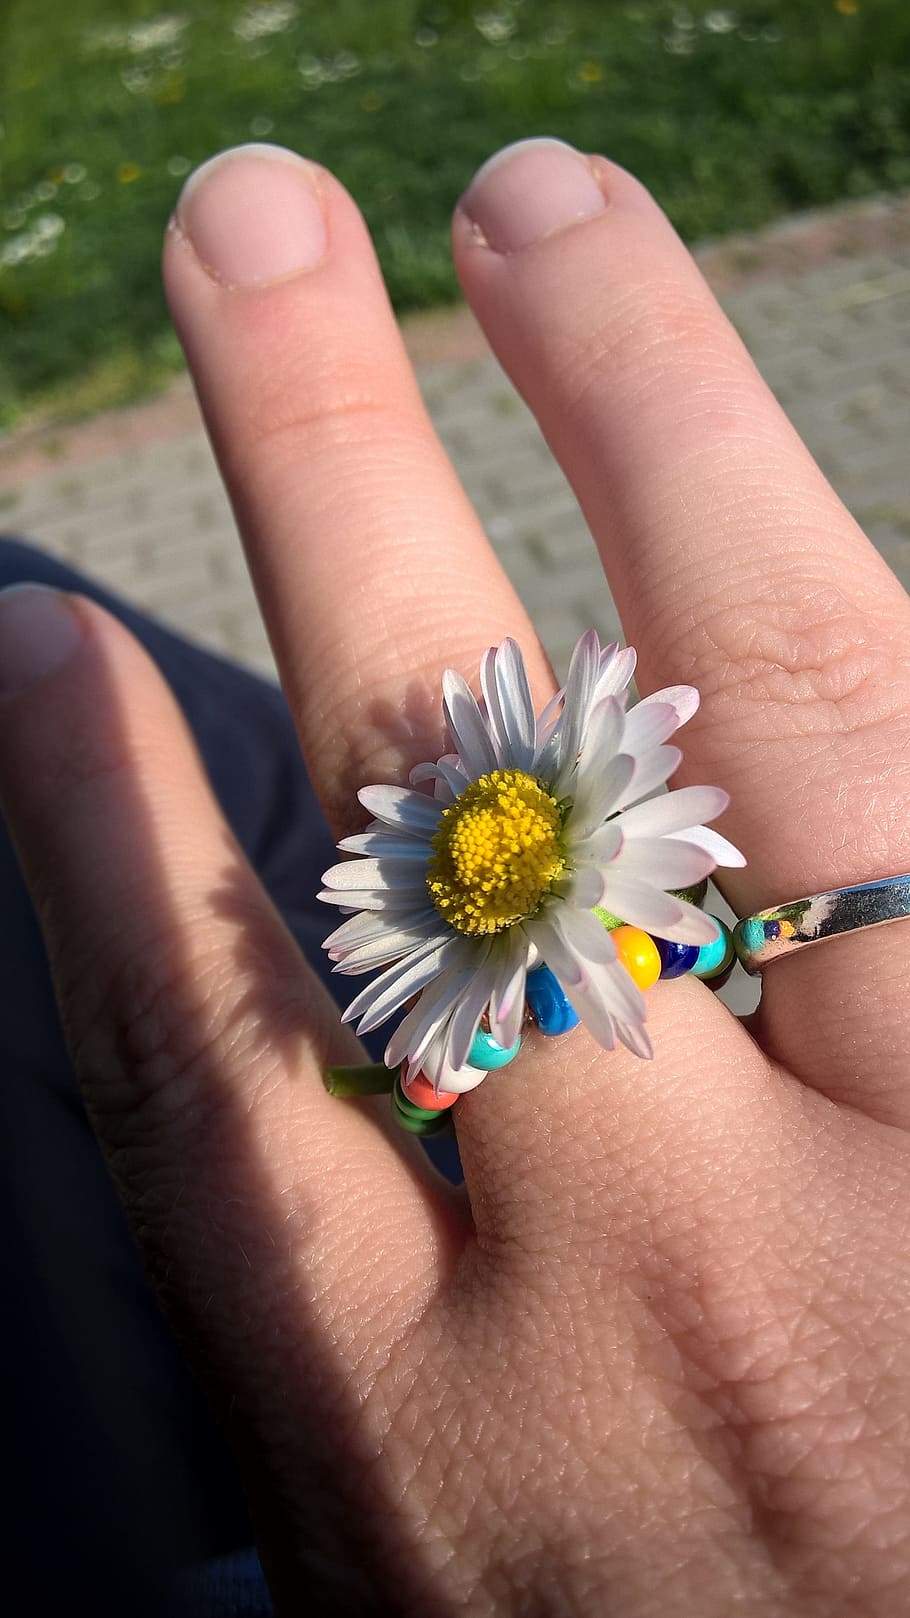 margaret, ring, spring, human body part, human hand, hand, flower, body part, flowering plant, real people